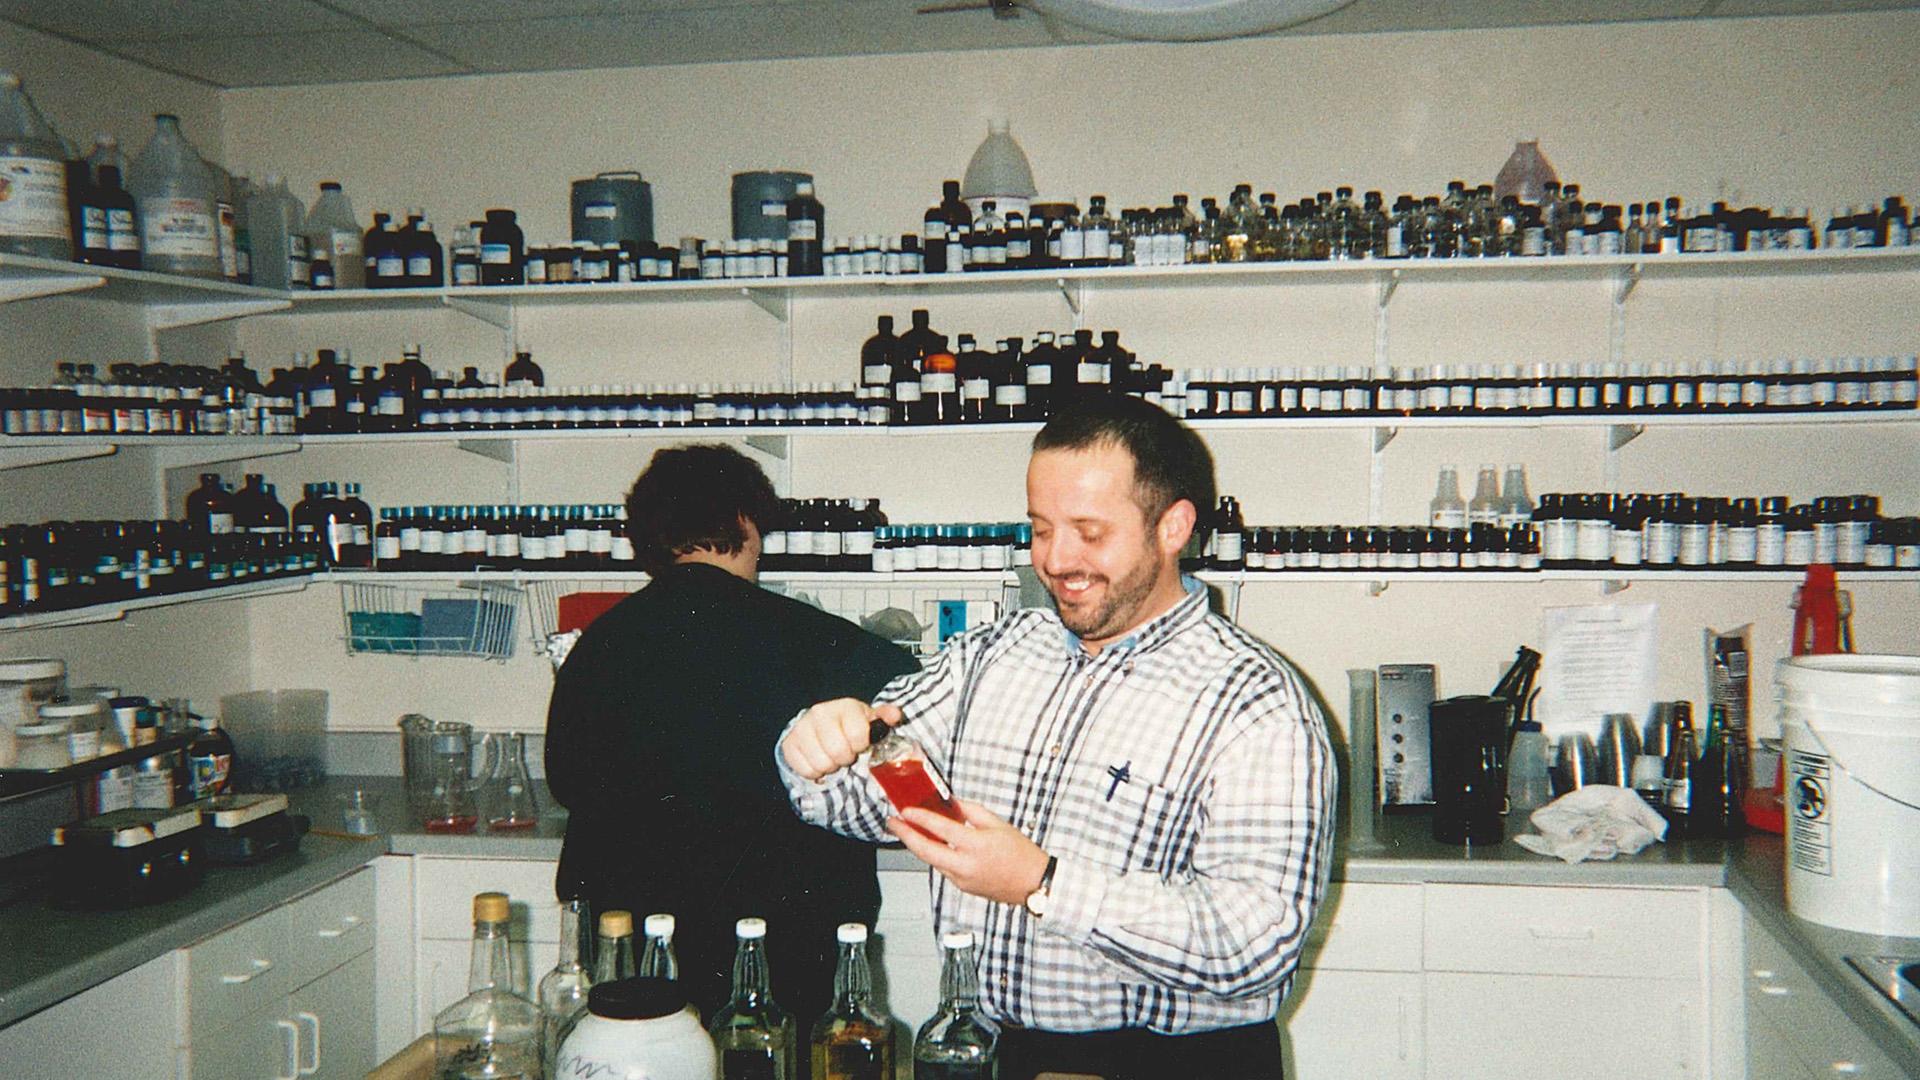 Dave examining a bottle in the lab